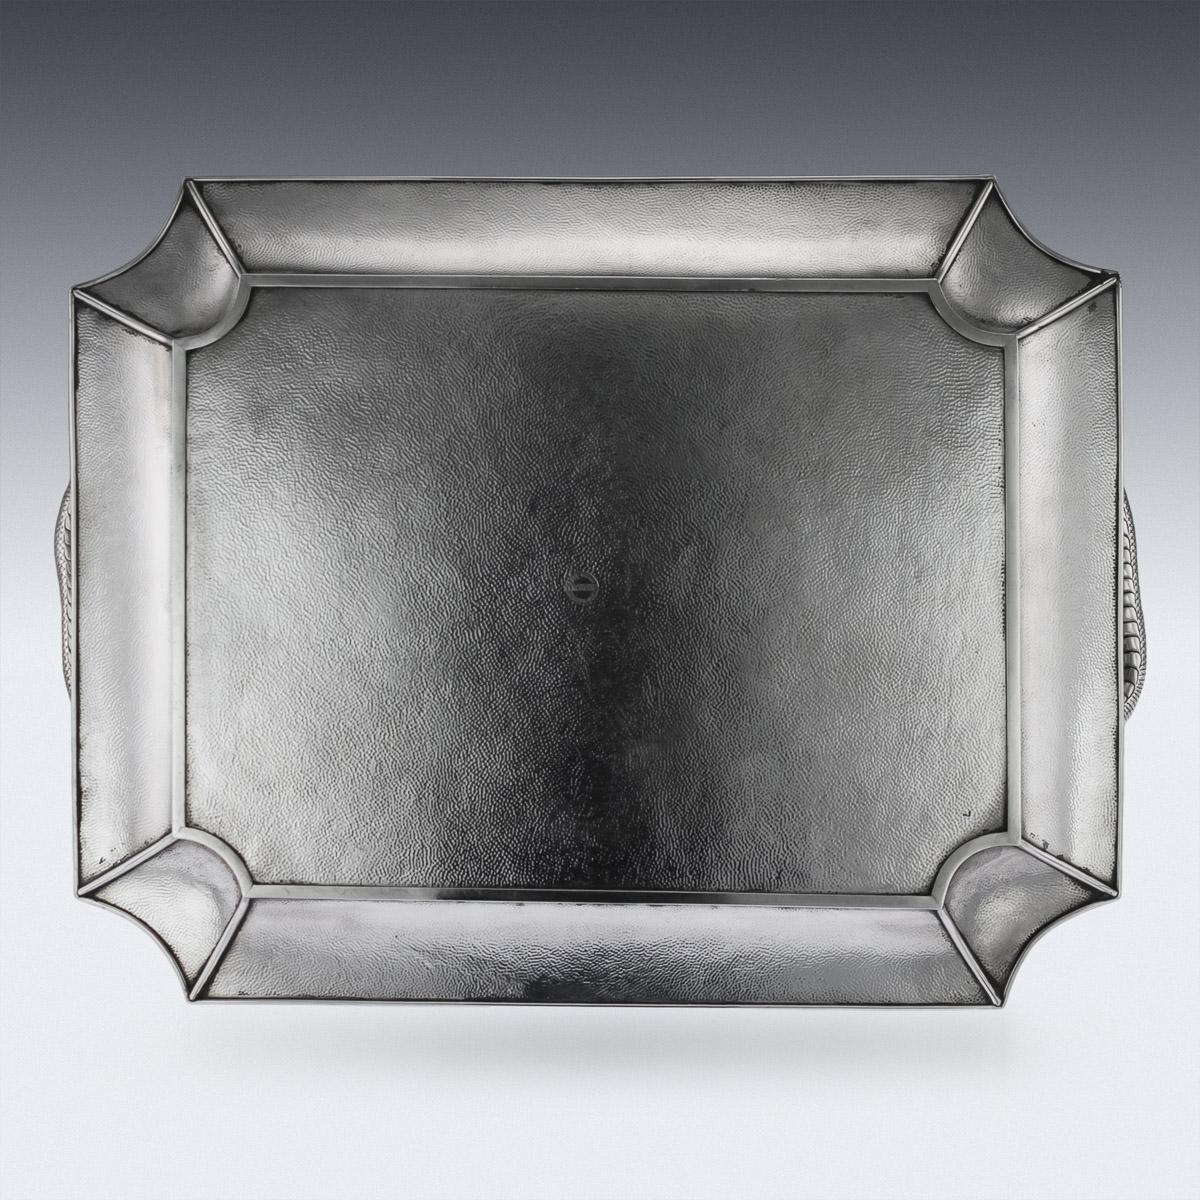 Antique early 20th century Japanese solid silver impressive tea tray, exceptional and magnificent quality, double walled, chased, embossed and applied with a water dragons in high relief, with dragon-form handles emerging from water and flowing